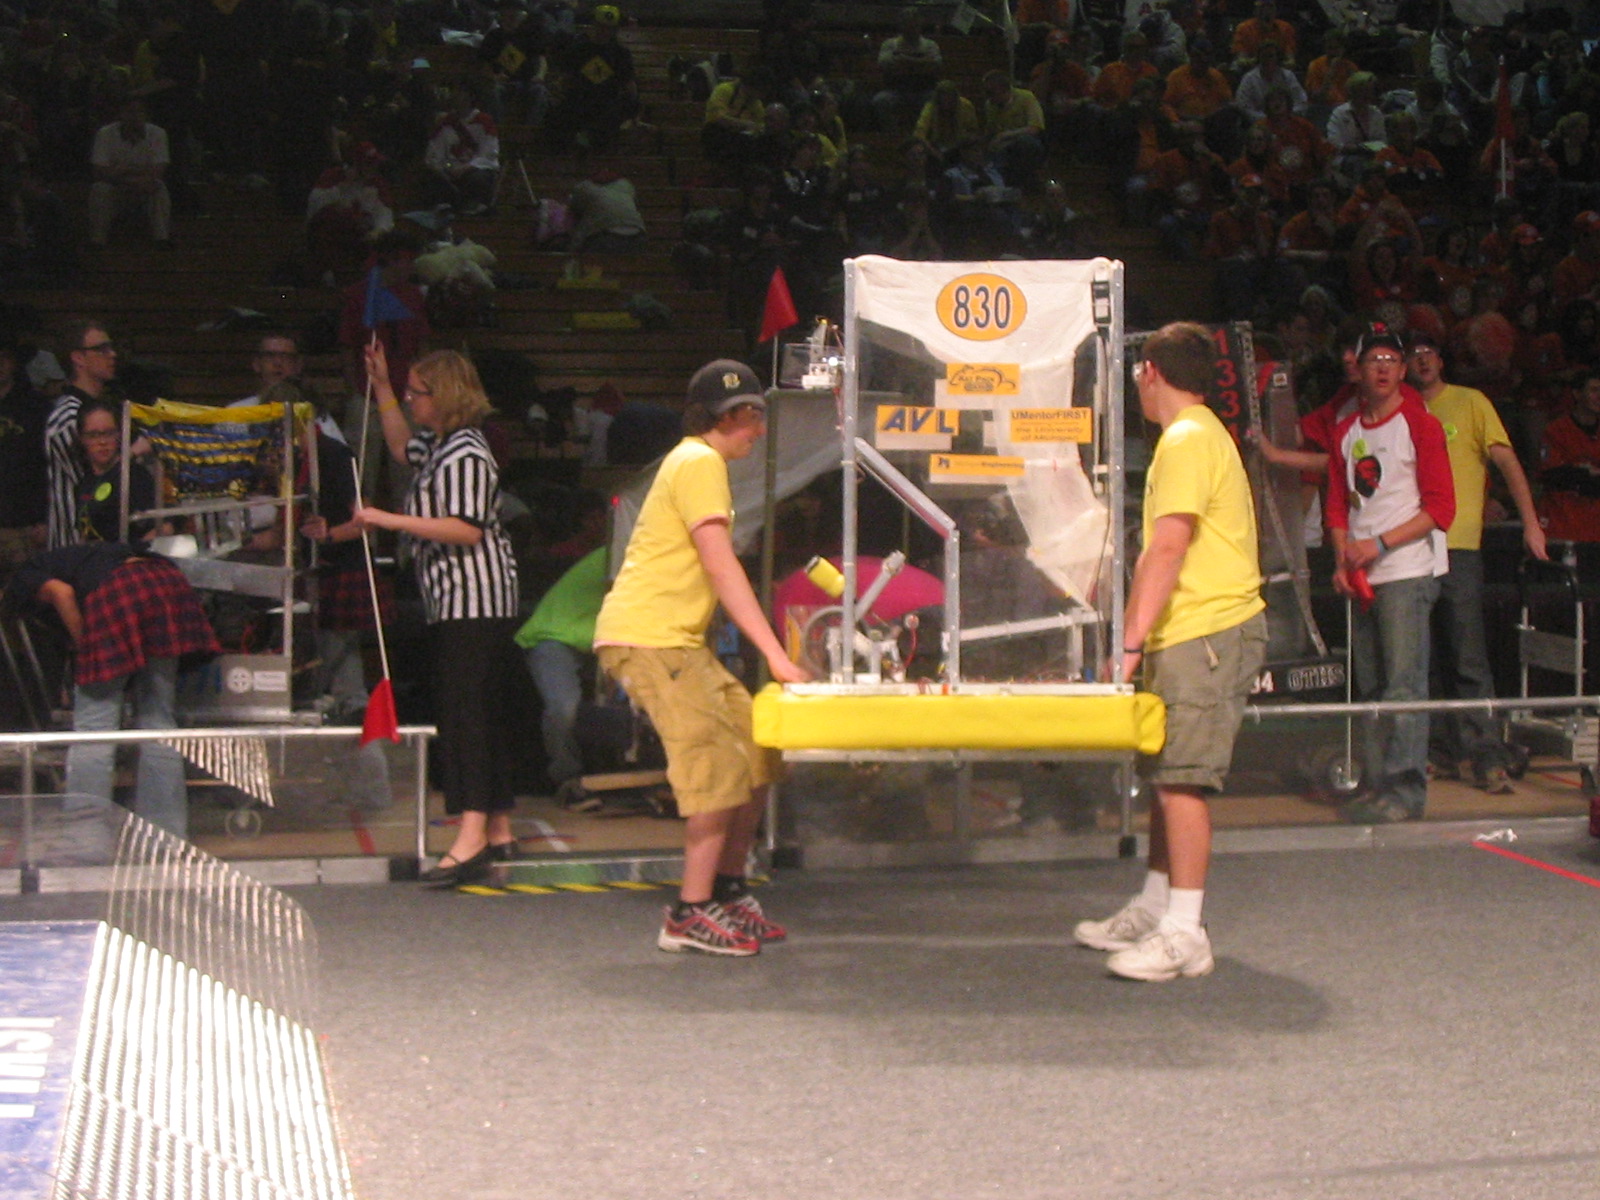 The 2006 drive team carrying the robot off the field.